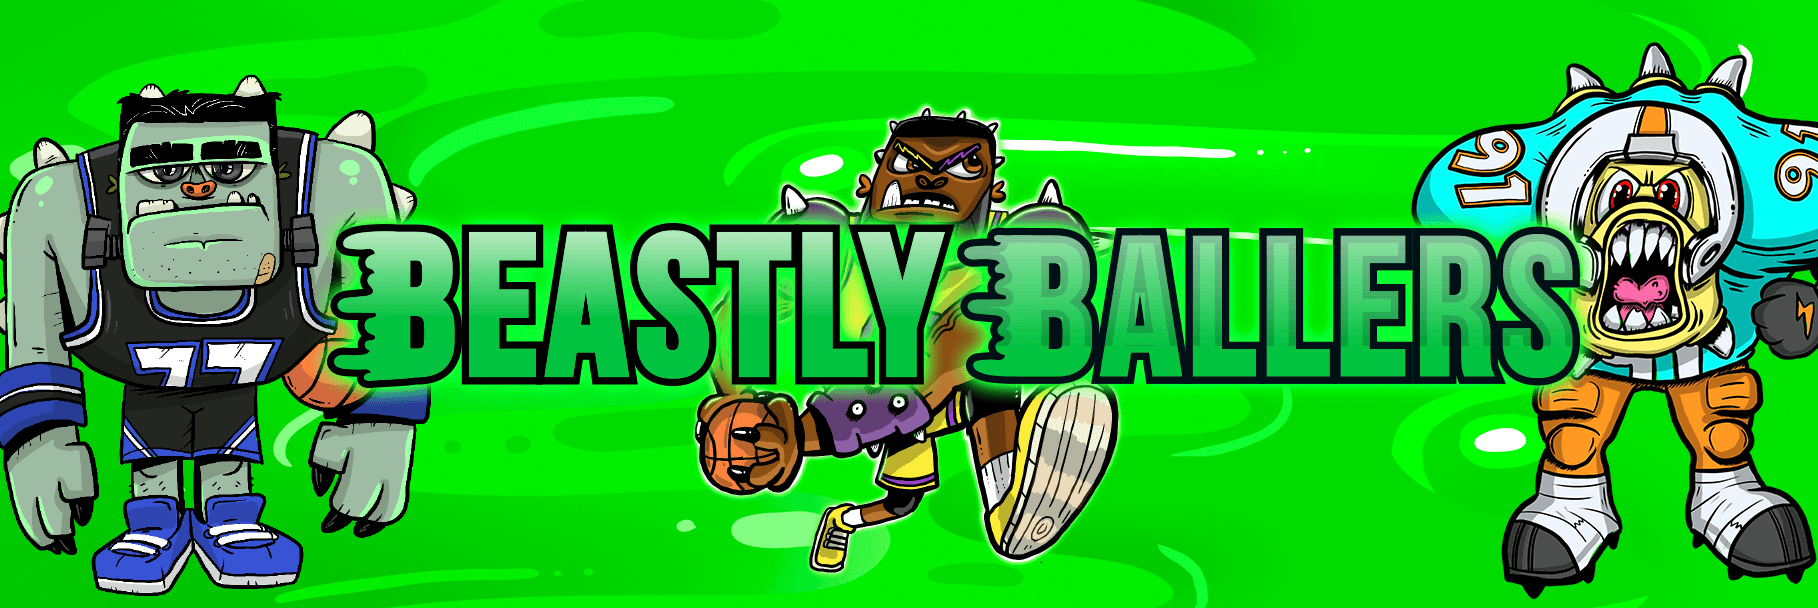 Beastly Ballers